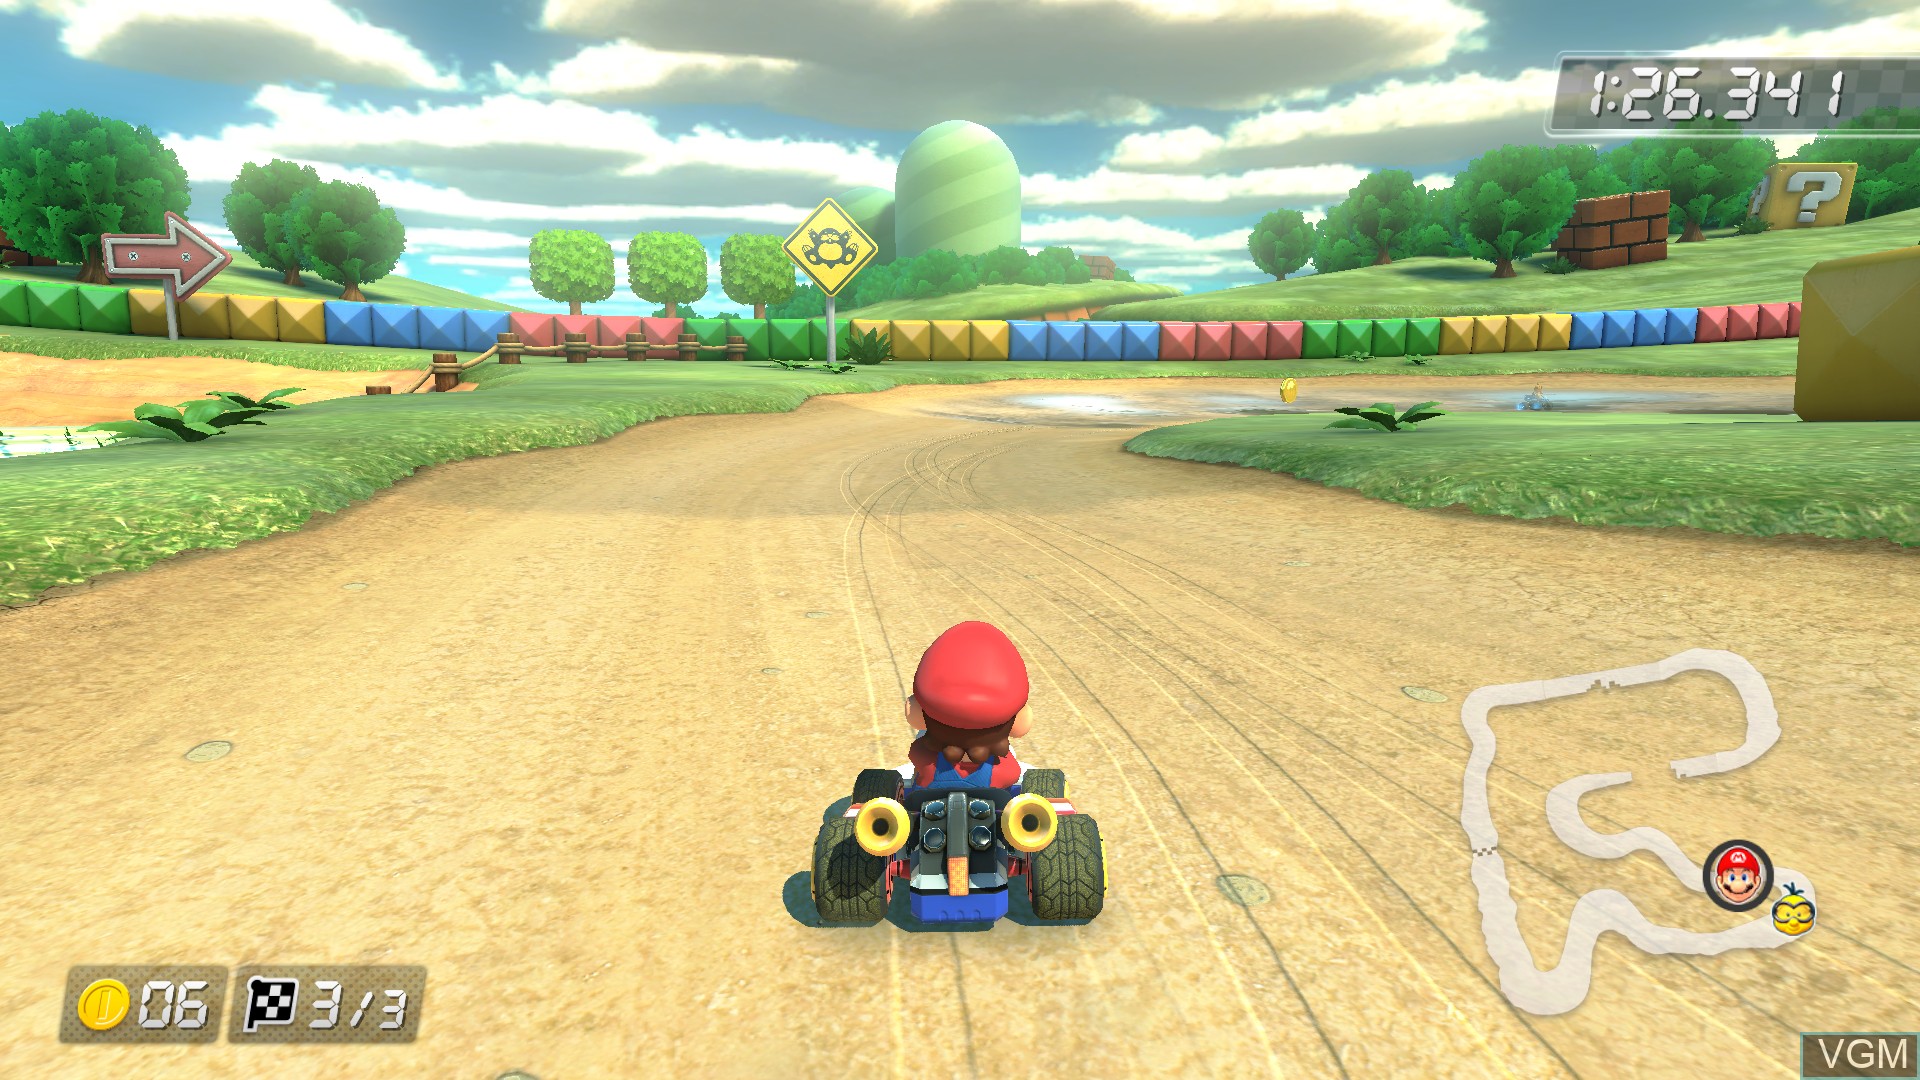 In-game screen of the game Mario Kart 8 Deluxe on Switch